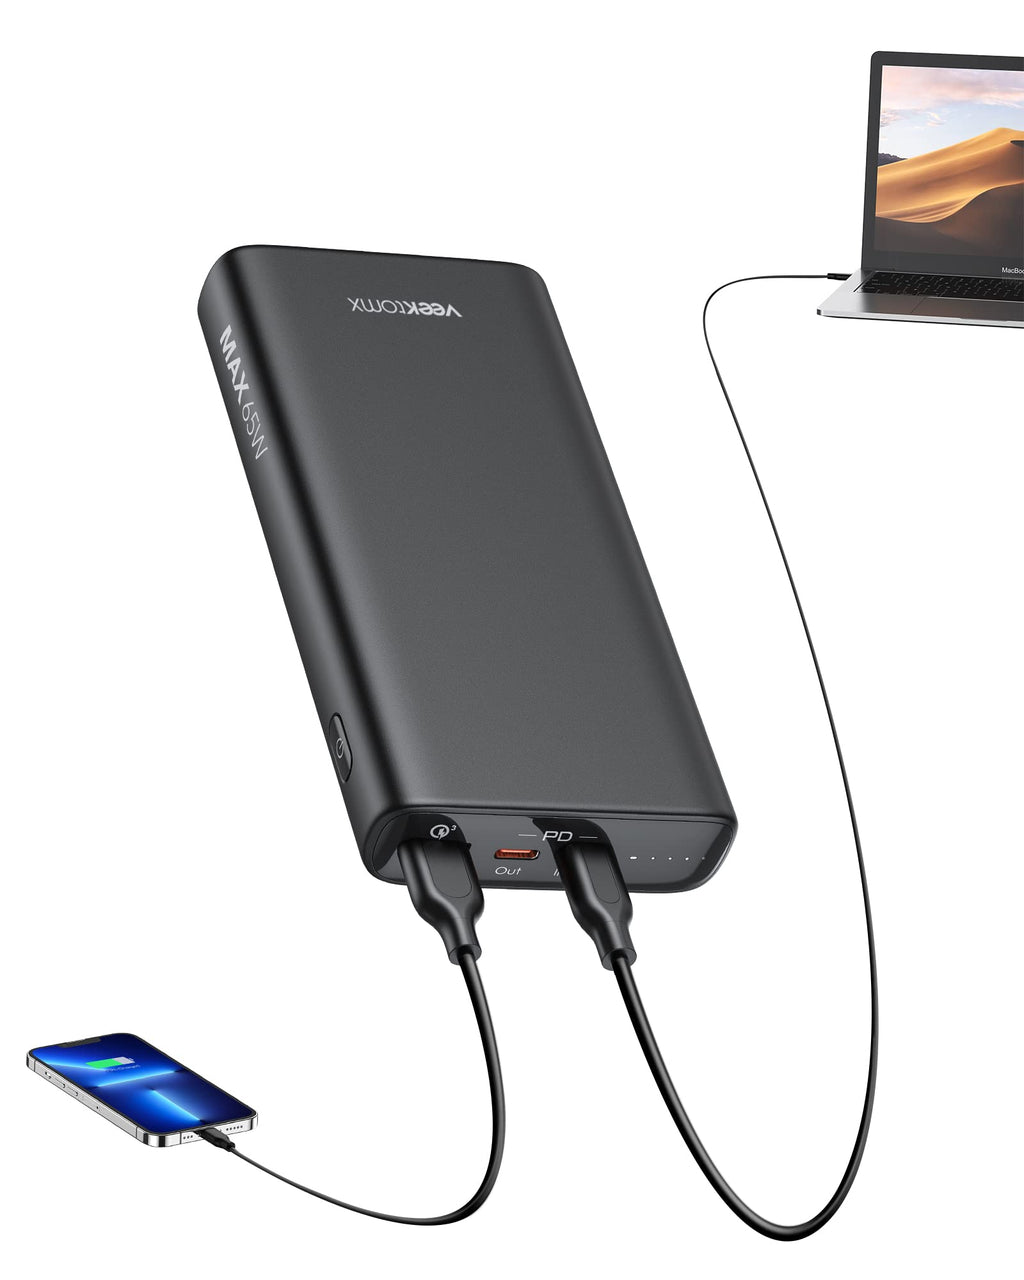  [AUSTRALIA] - Laptop Power Bank,65W PD3.0 Portable Charger for Laptop, QC 3.0 20000mAh Power Bank, VEEKTOMX Fast Charging 3 Outputs Battery Pack for MacBook/iPhone/Switch/Tablet/Samsung Black